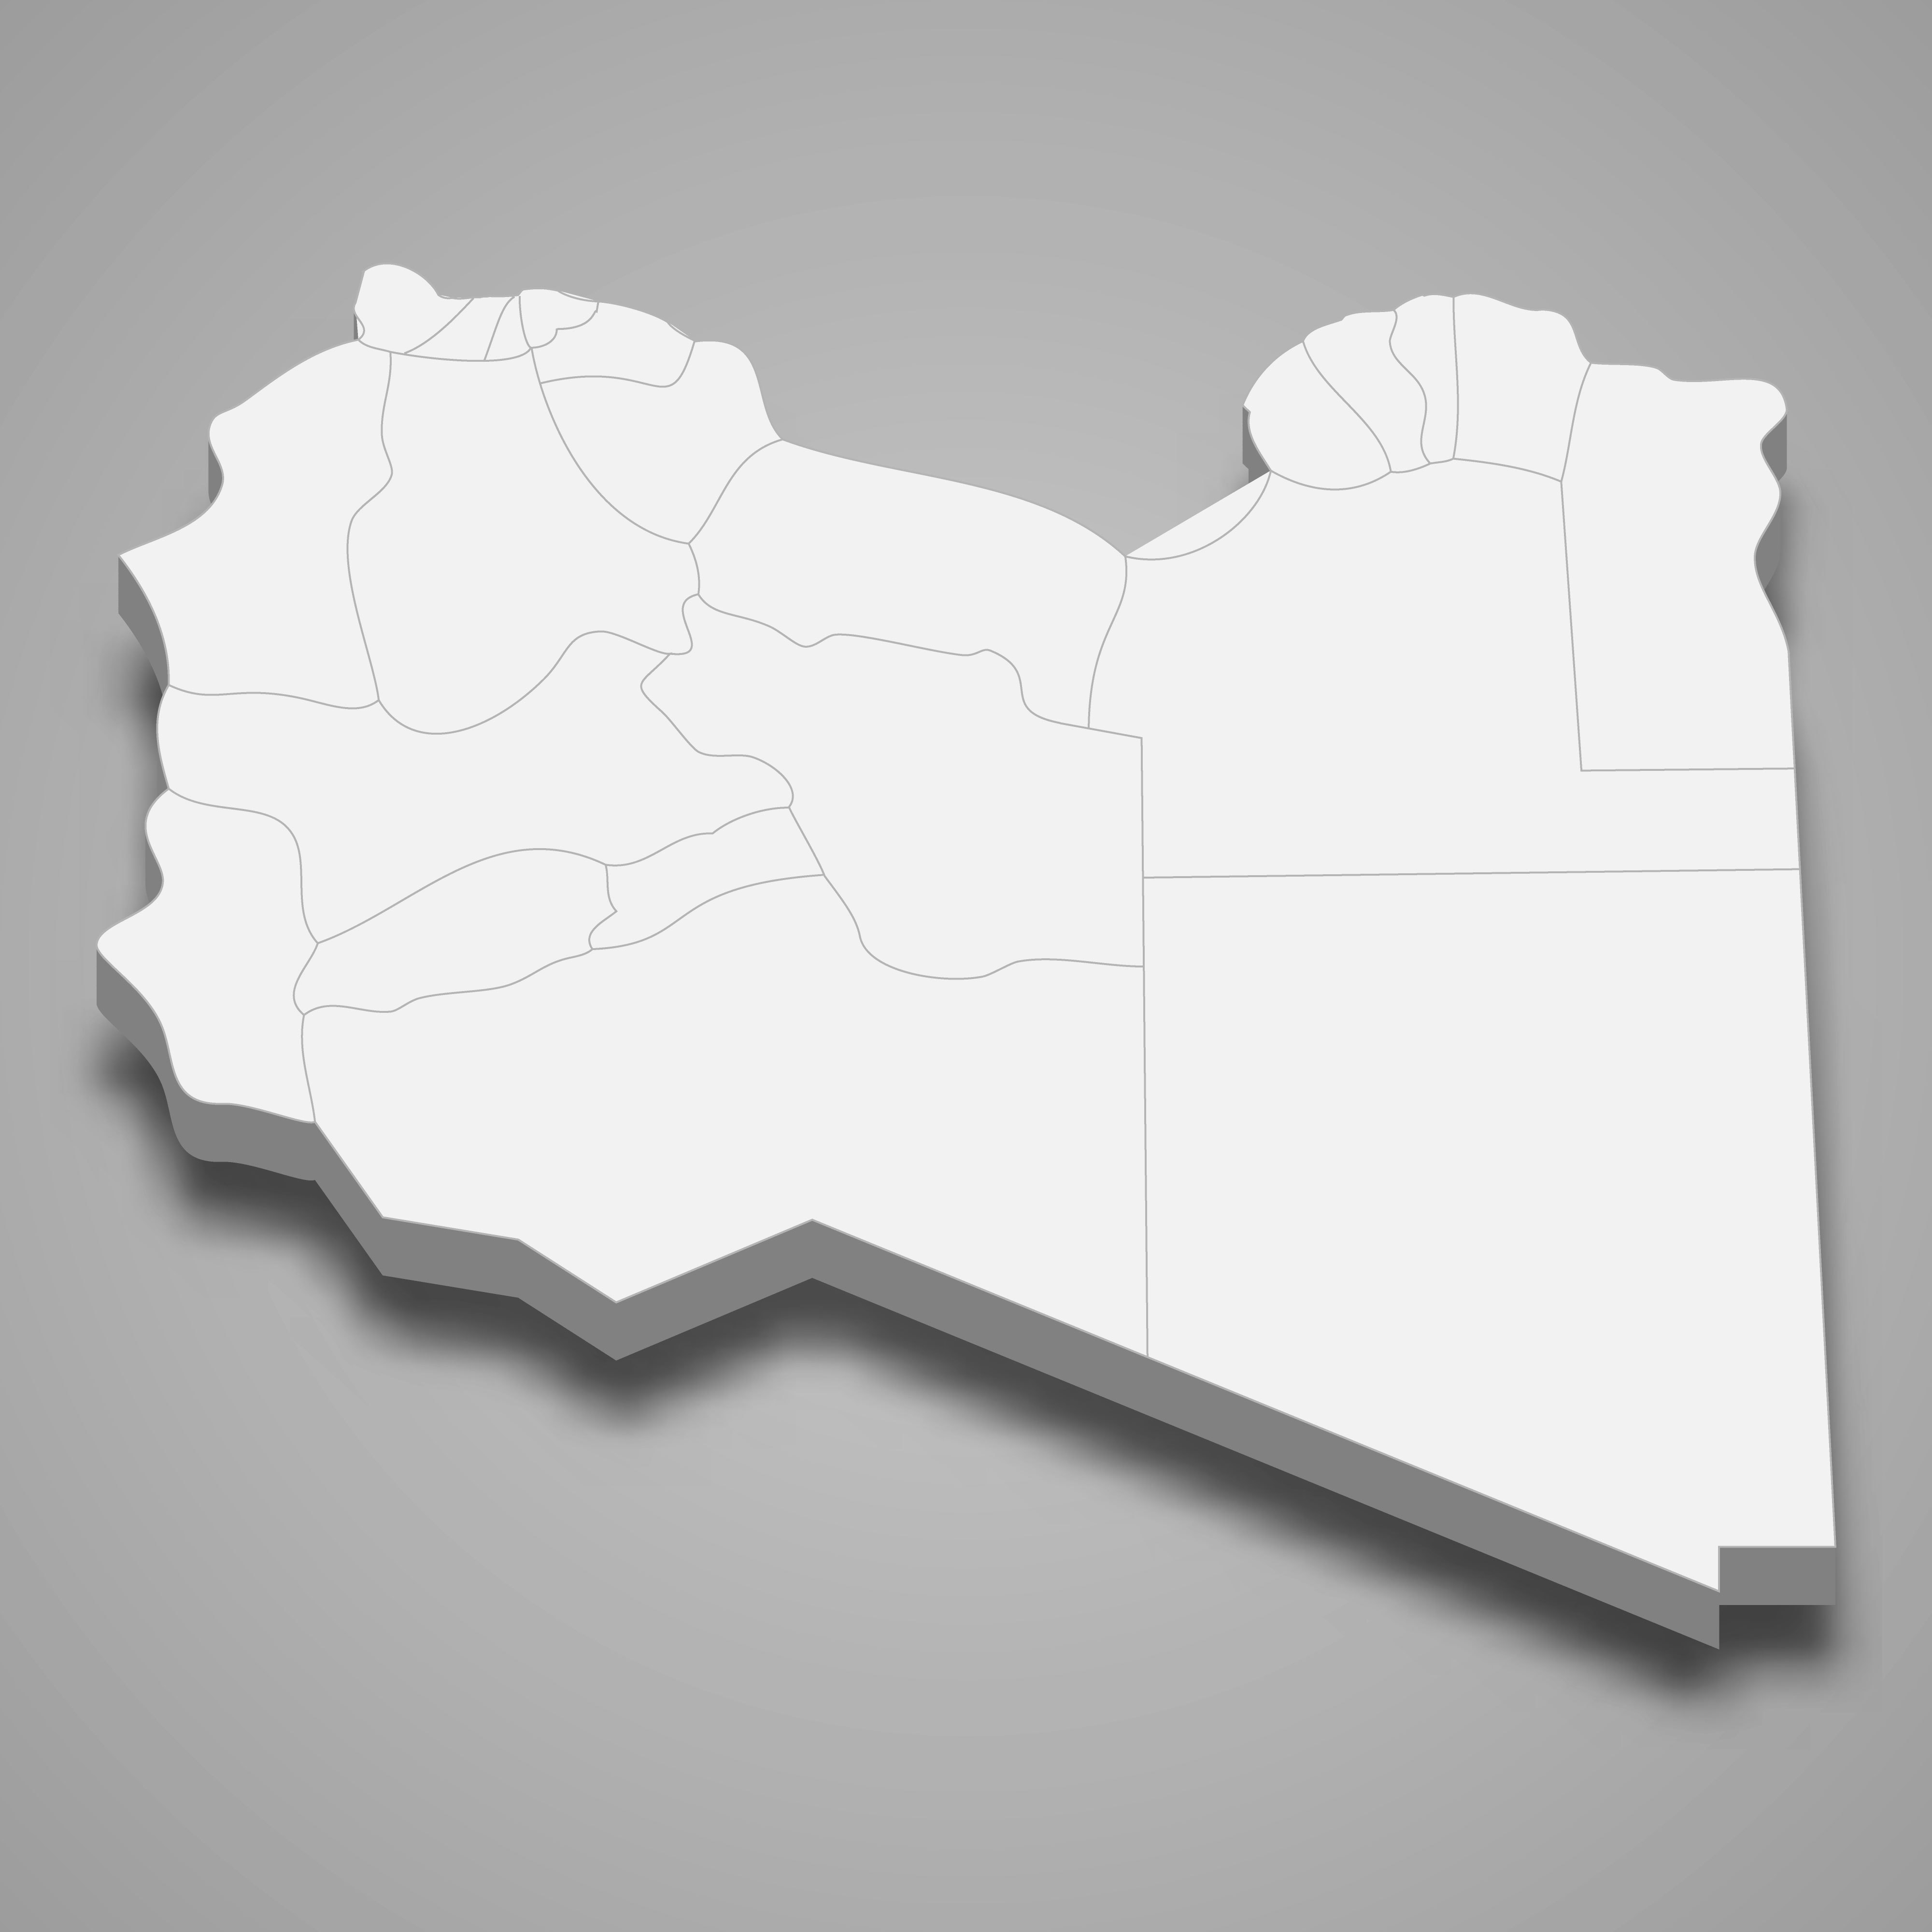 3d map of Libya with borders of regions. 3d map with borders of regions Template for your design